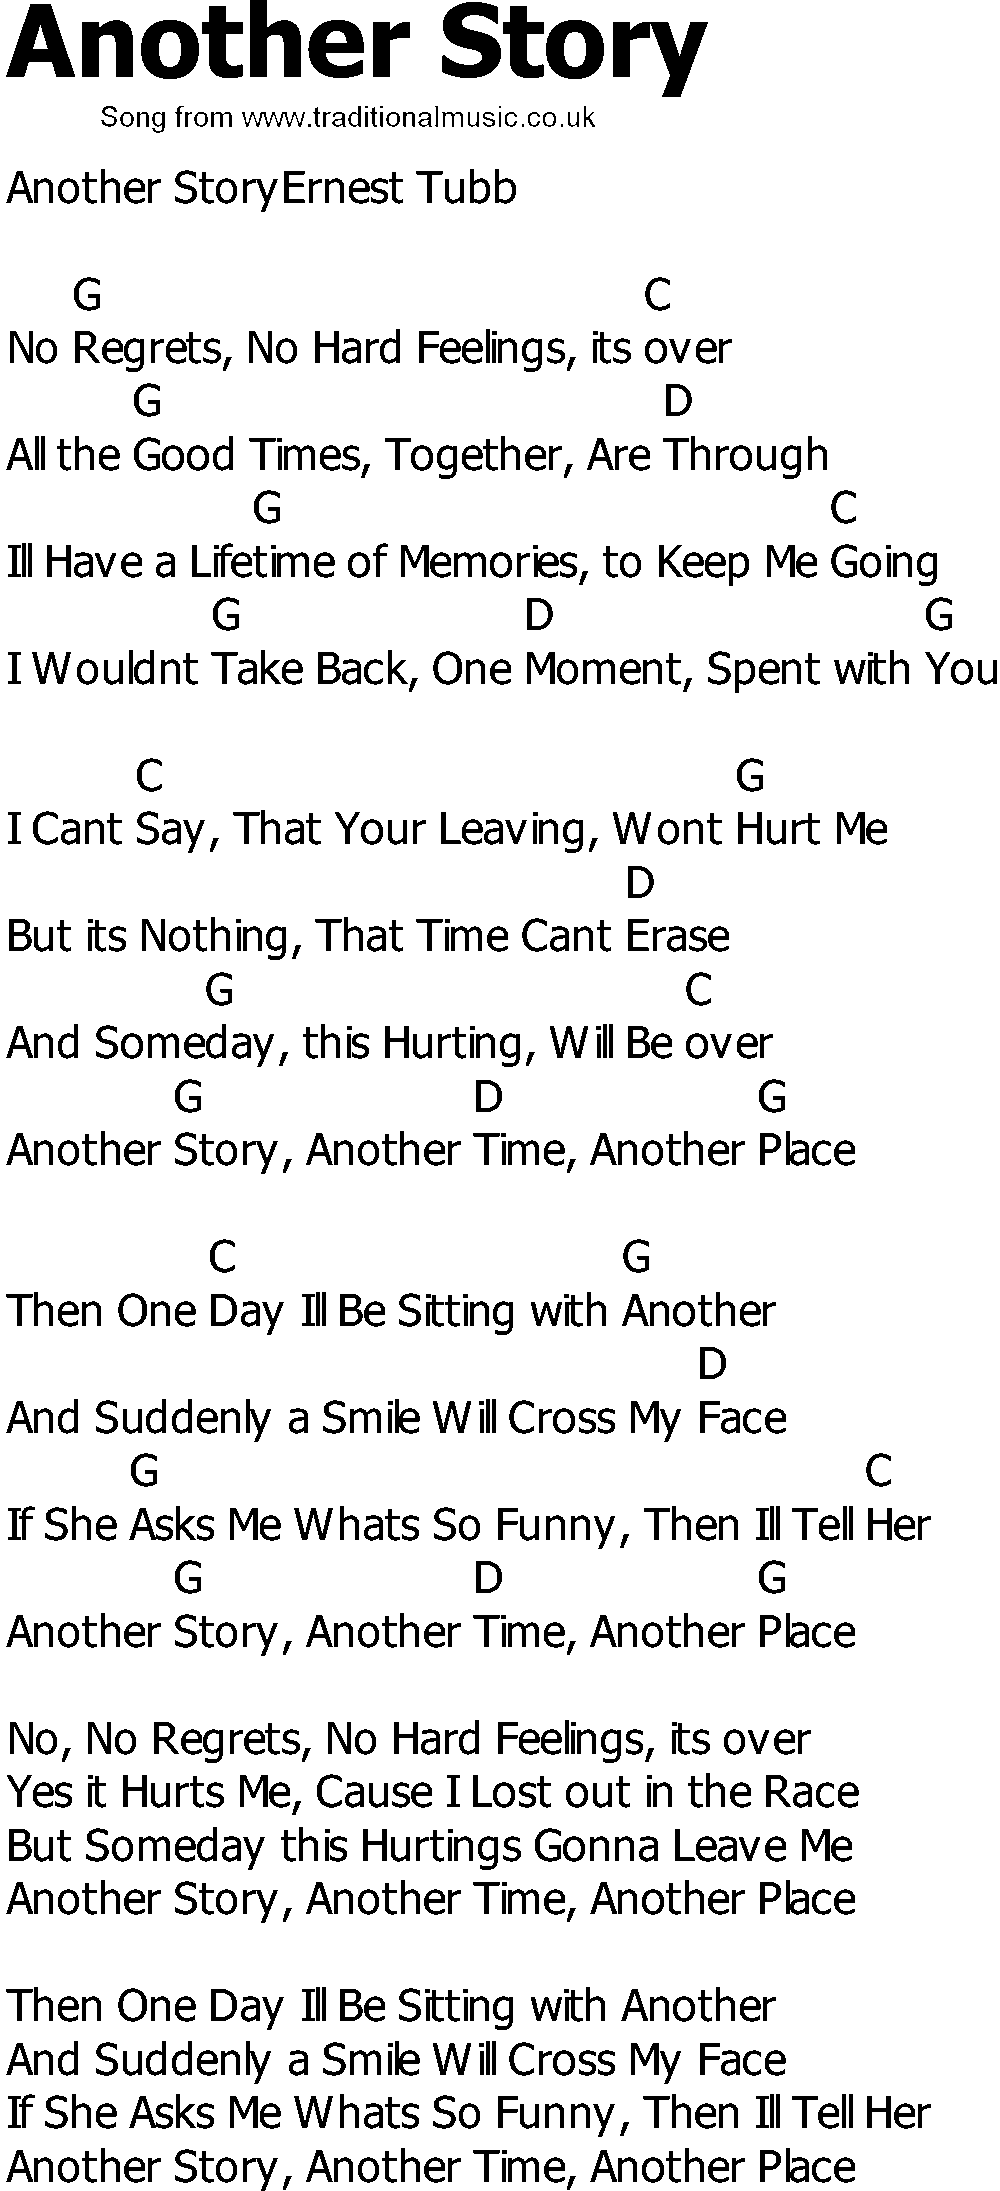 Old Country song lyrics with chords - Another Story